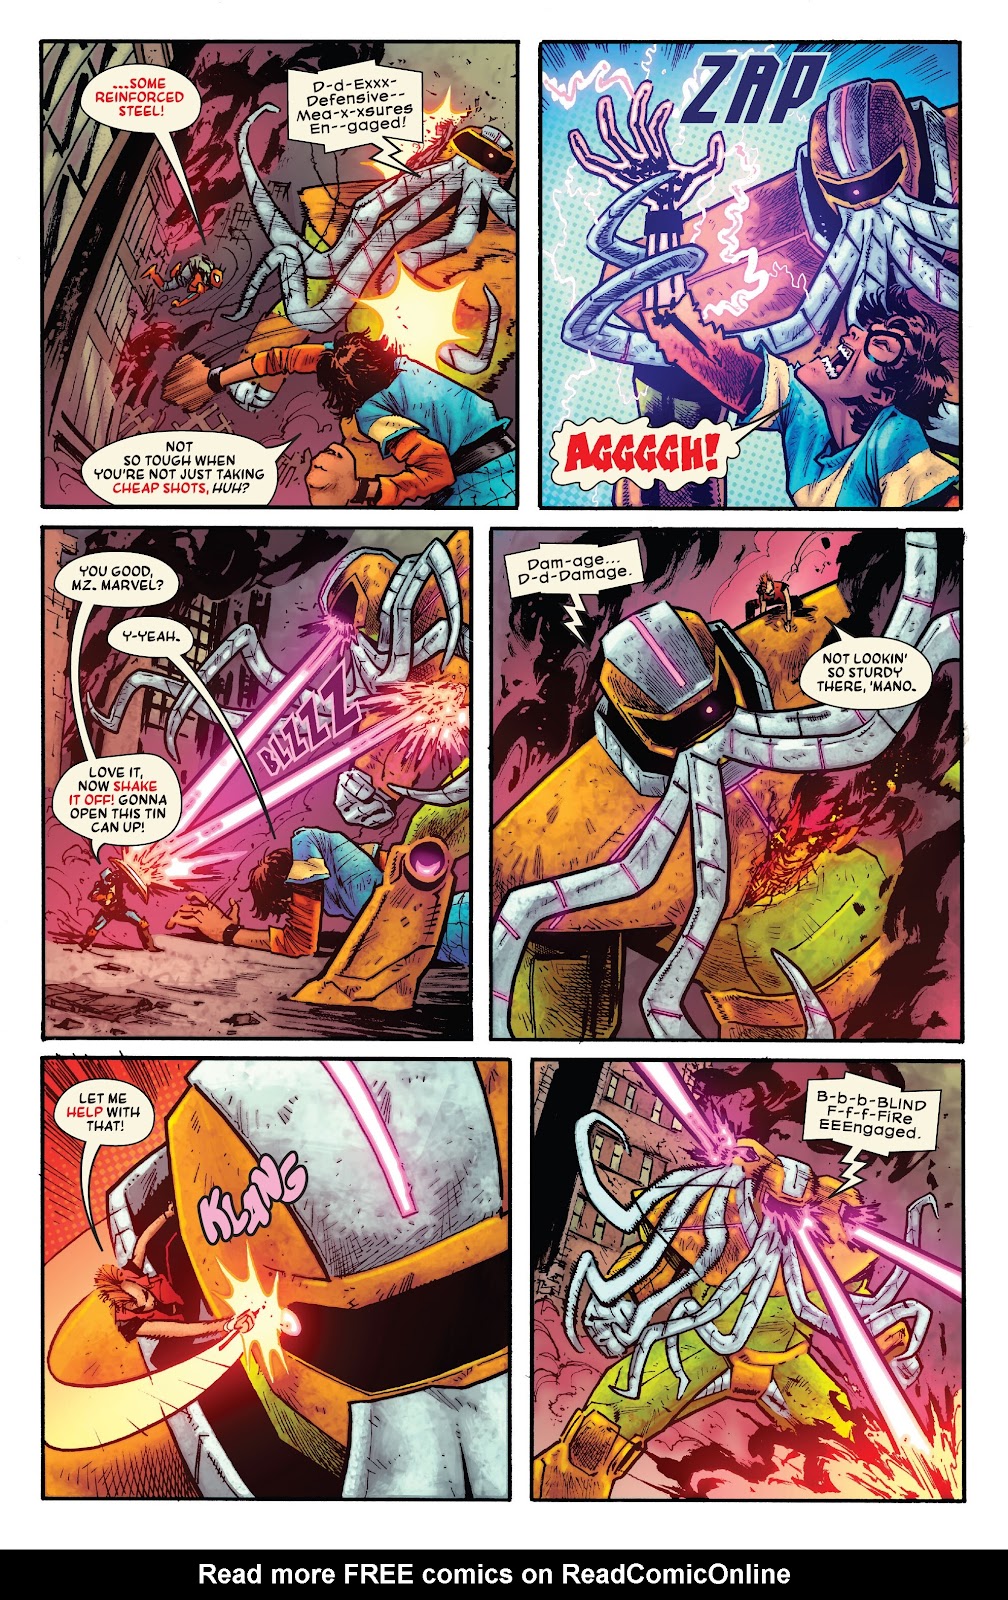 Spider-Punk: Arms Race issue 1 - Page 21